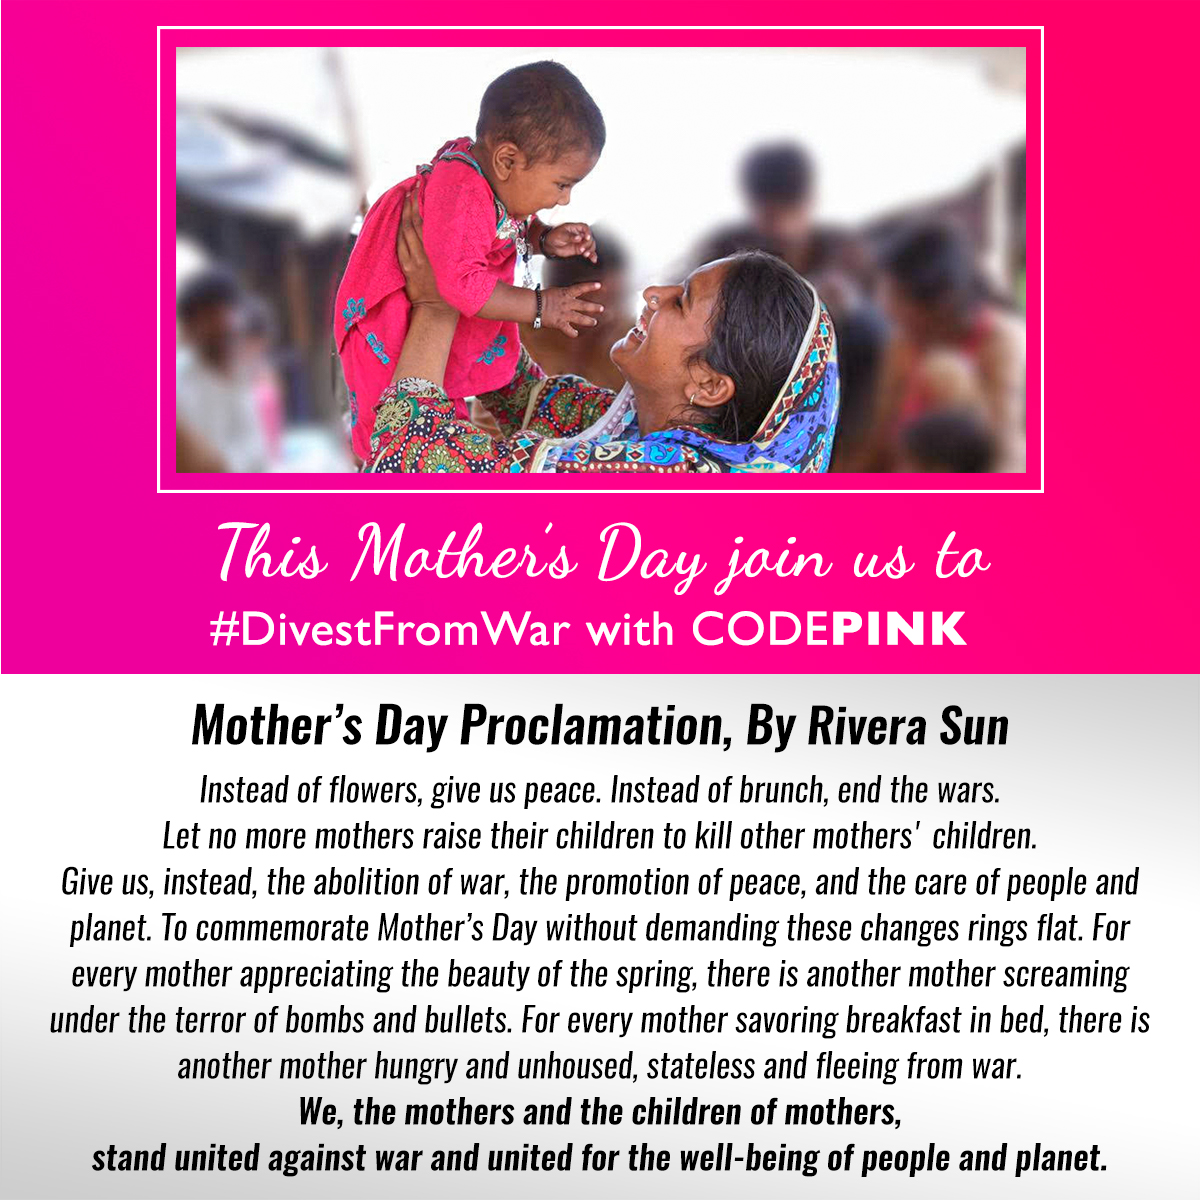 Mother's Day Proclamation by Rivera Sun